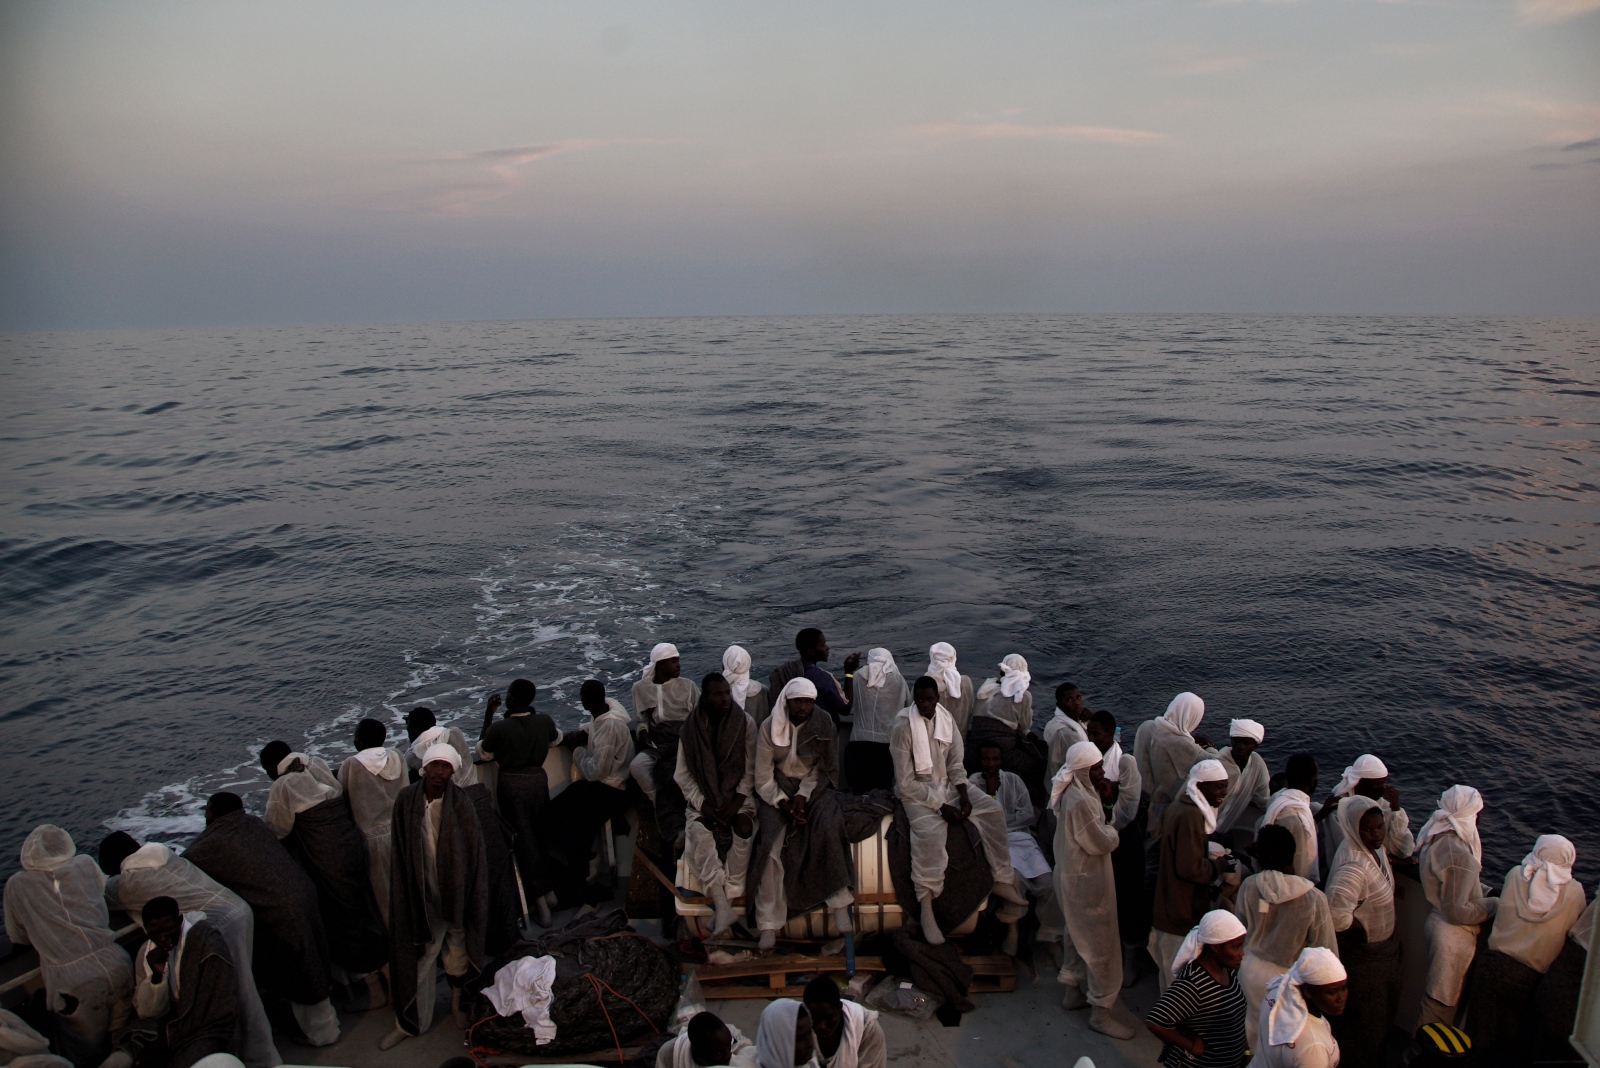 Image from SINGLES - Migrants look out from the stern of the...